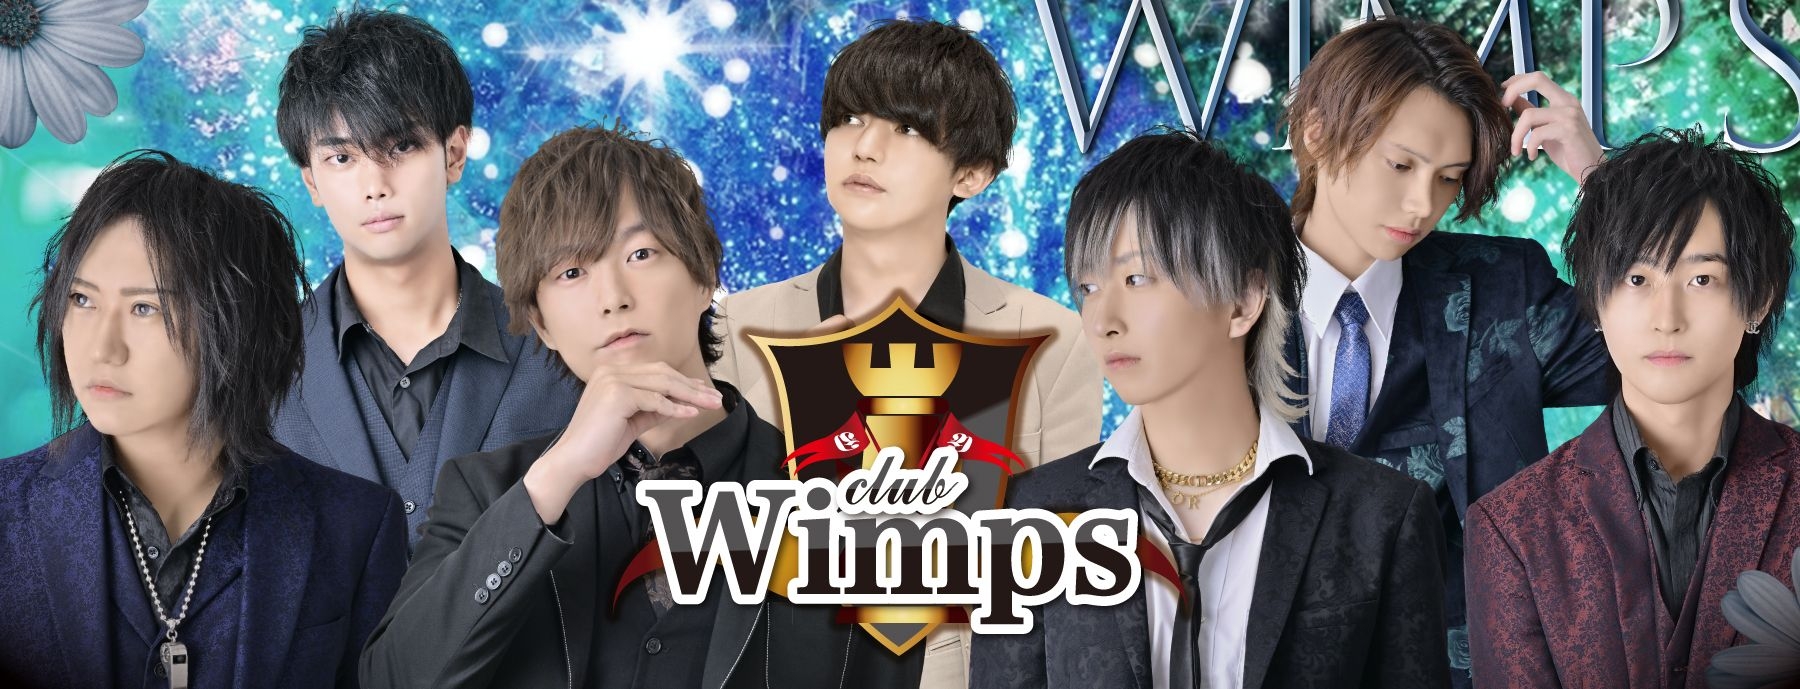 club Wimps～ウィンプス～